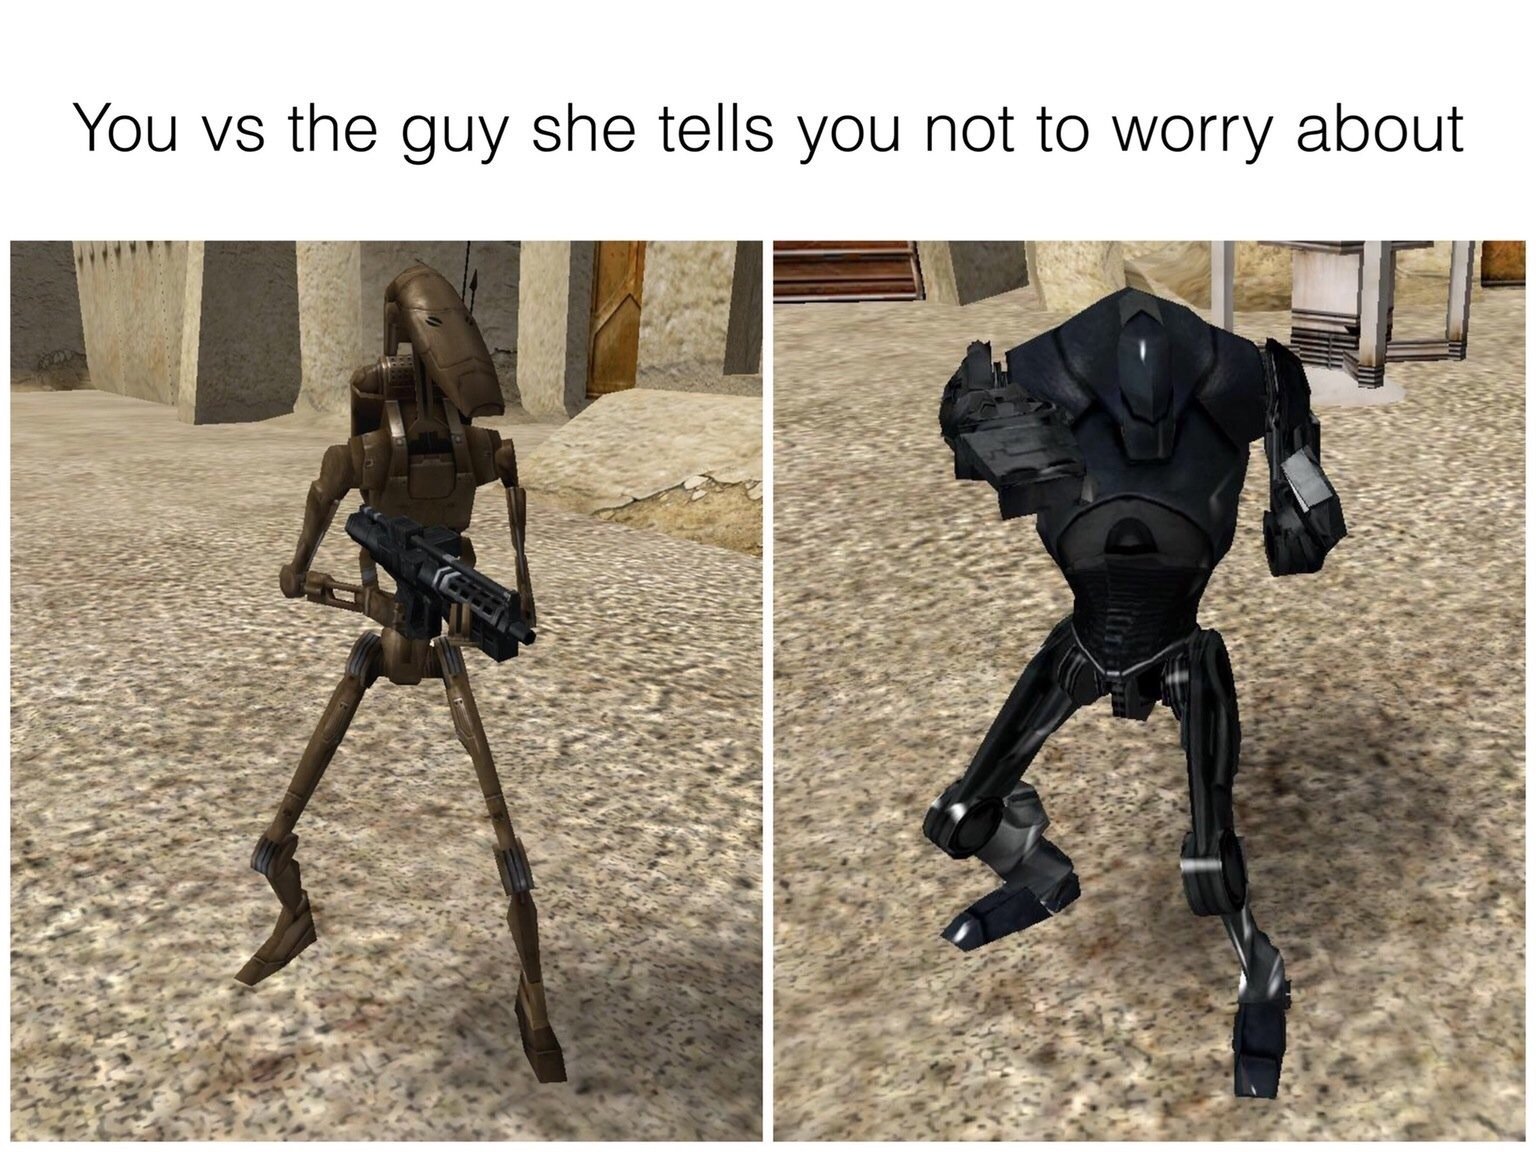 star wars battlefront 2 super battle droid - You vs the guy she tells you not to worry about